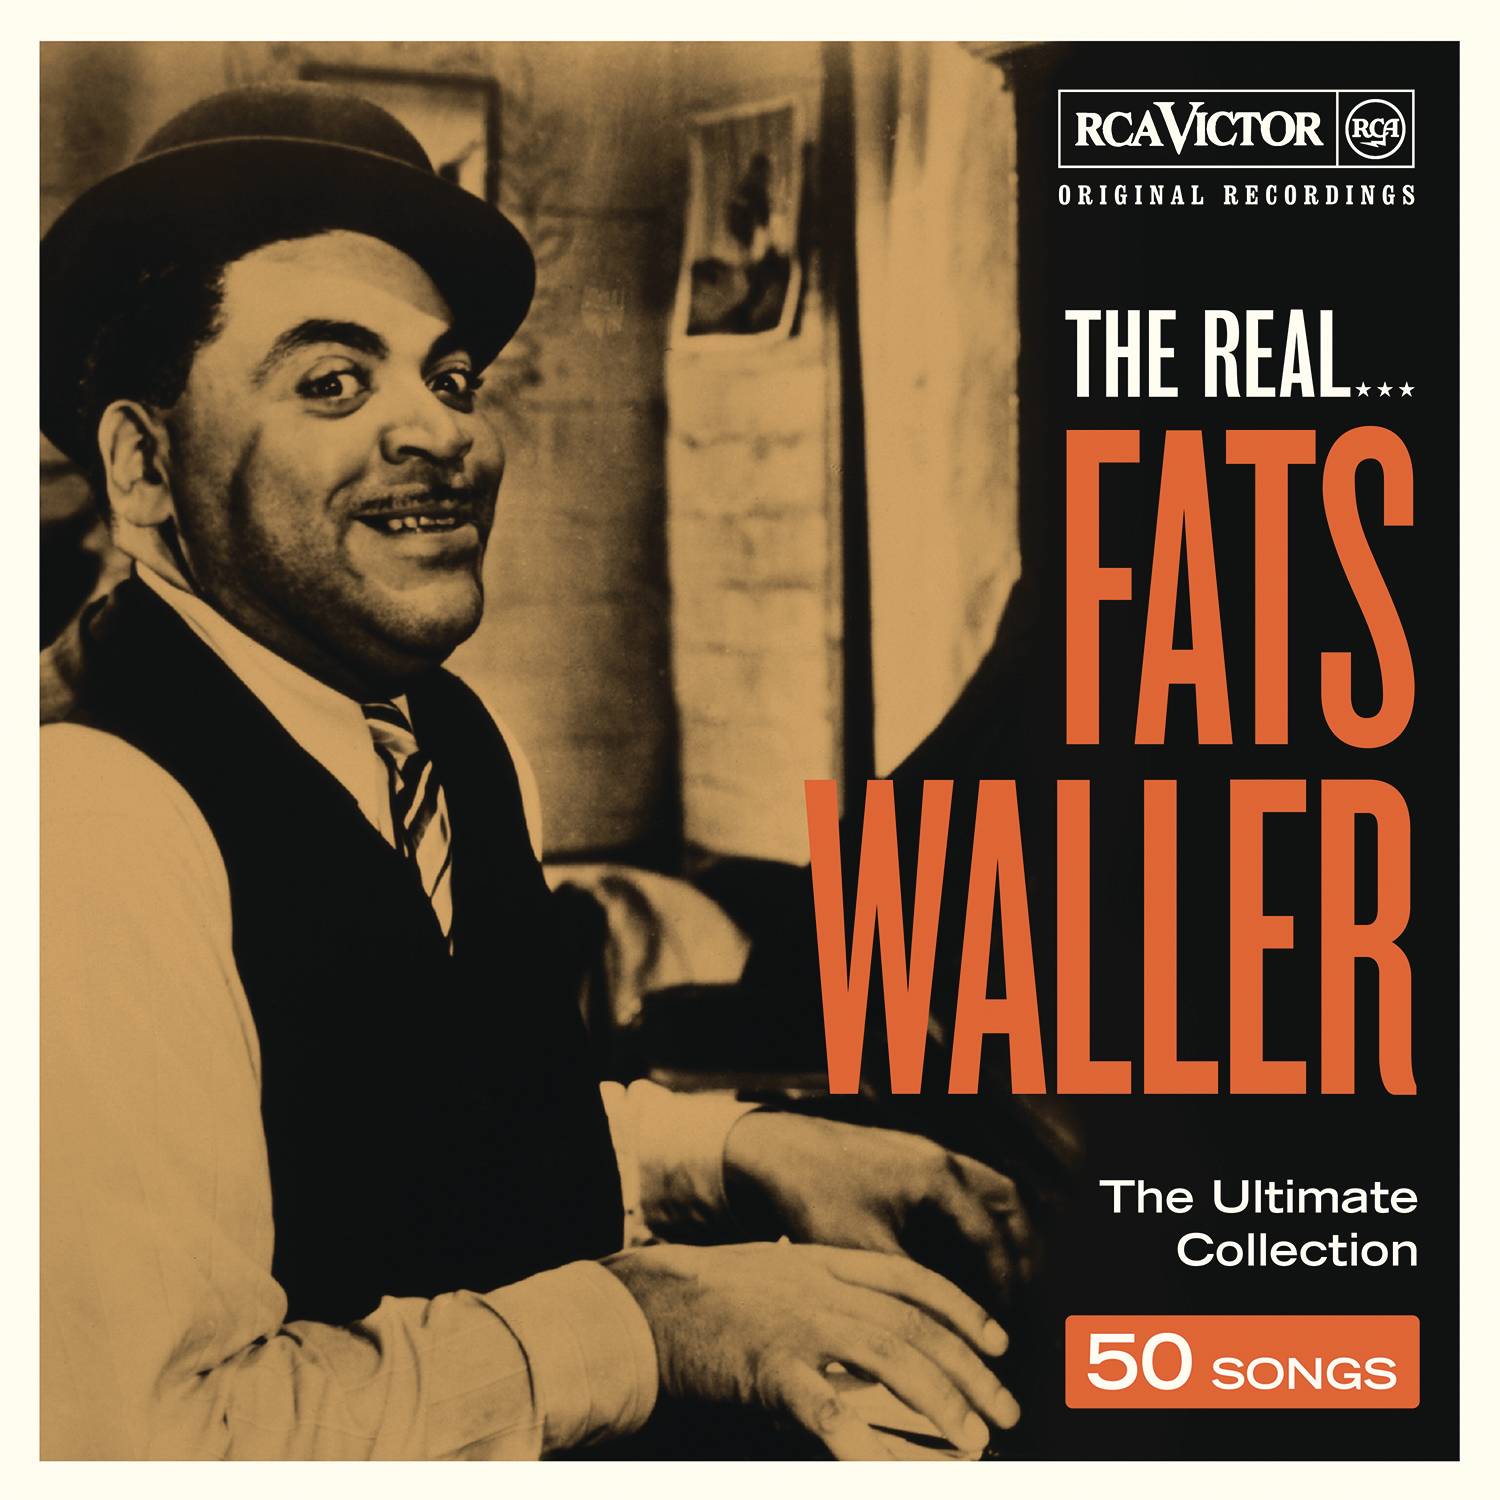 The Real... Fats Waller